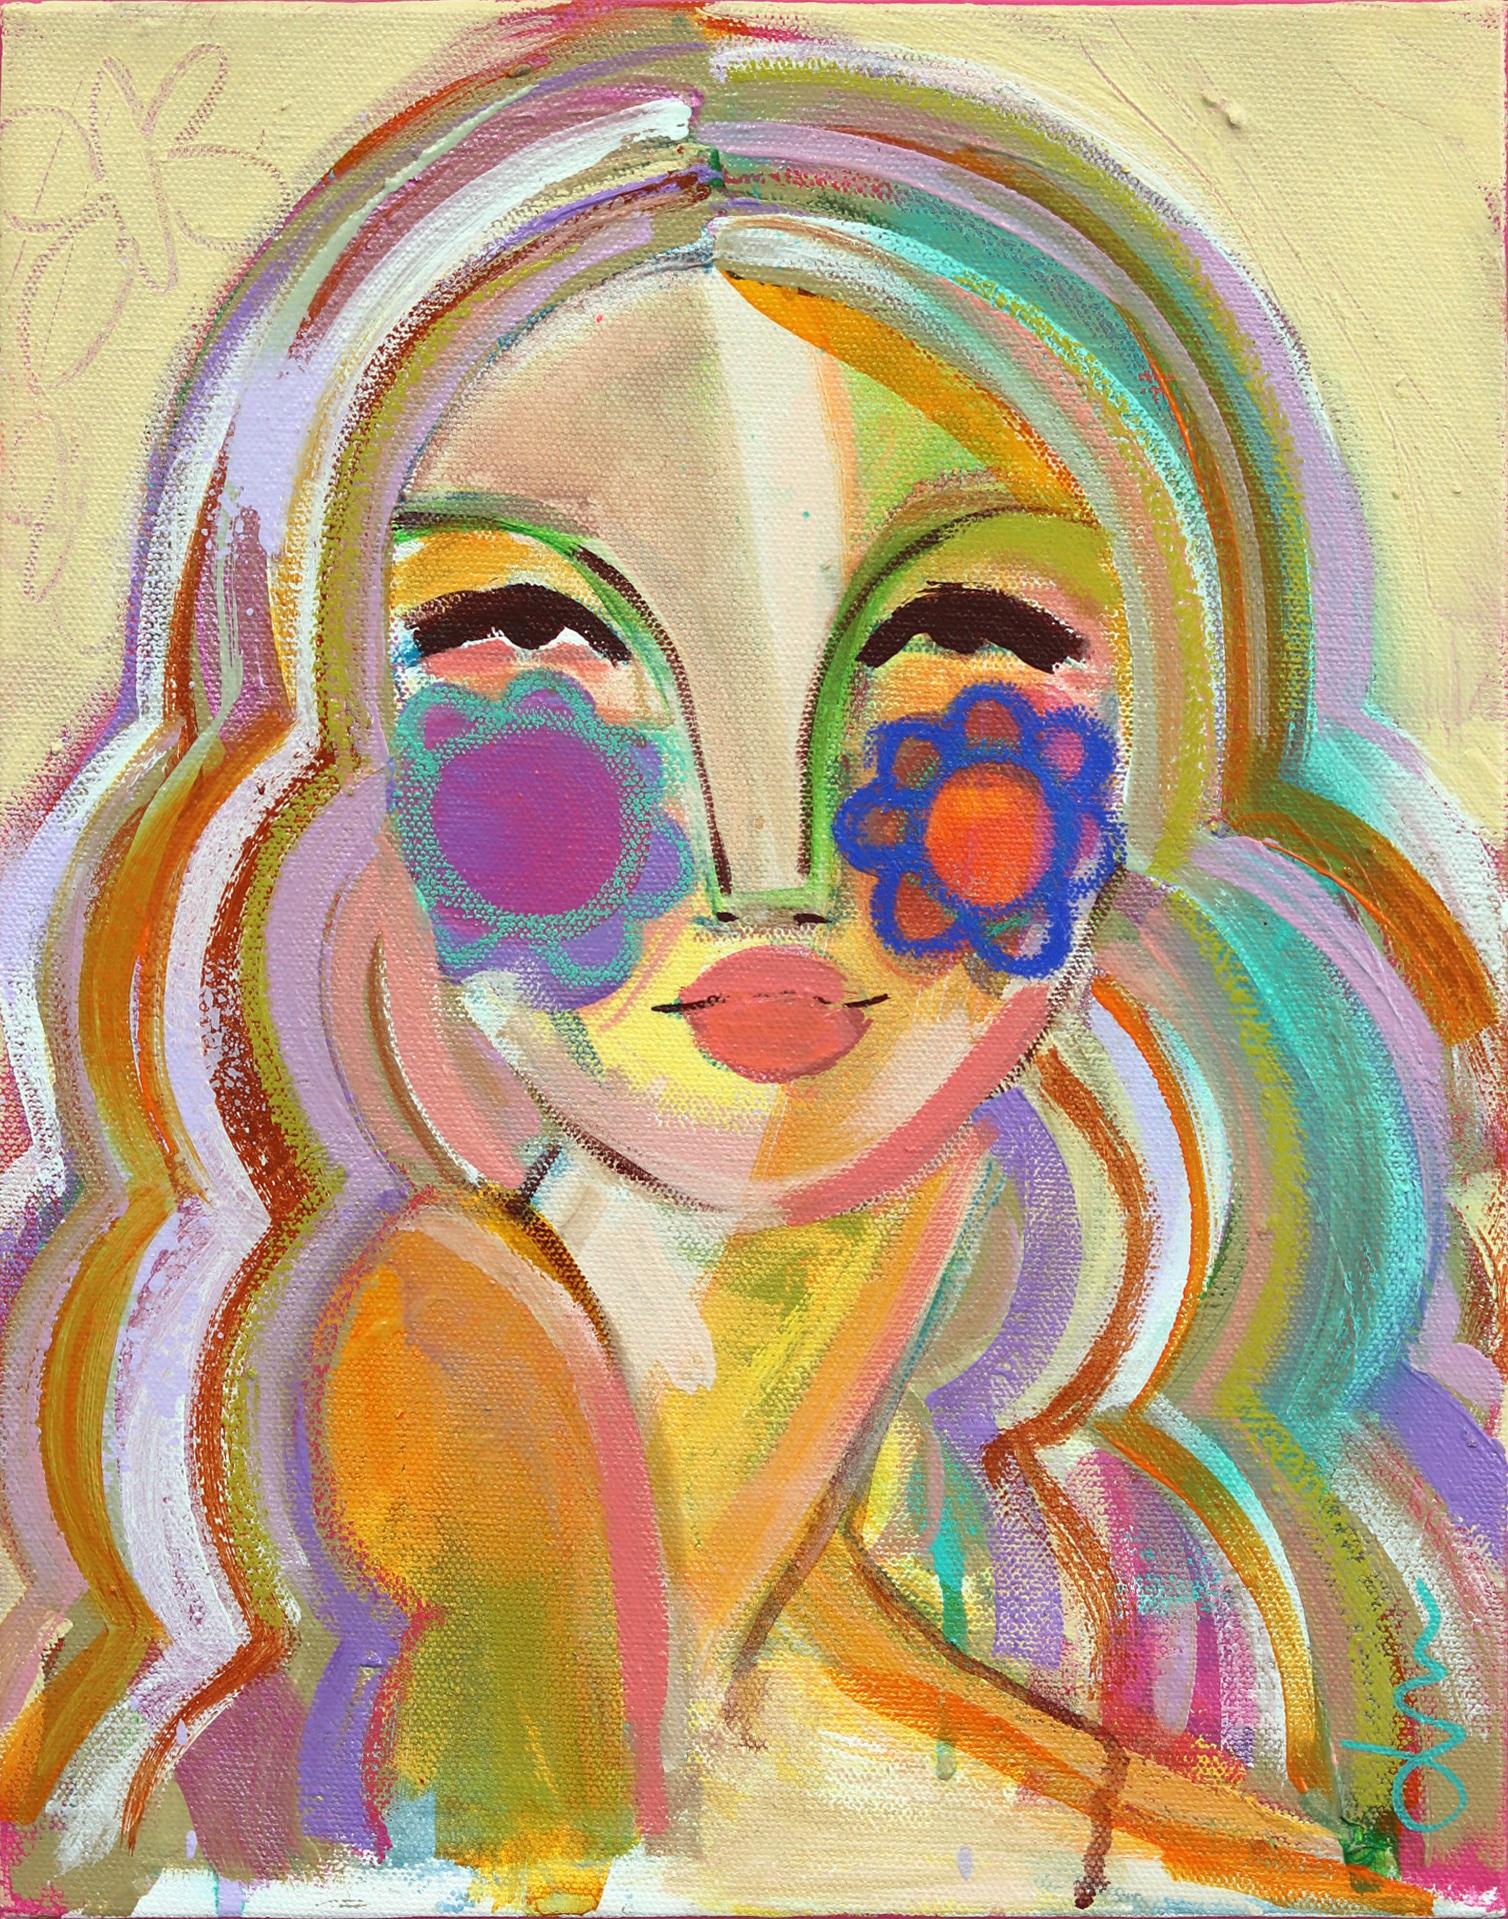 Lindsey McCord Portrait Painting - Summer Stunner - Colorful Abstract Figurative Portrait Original Painting